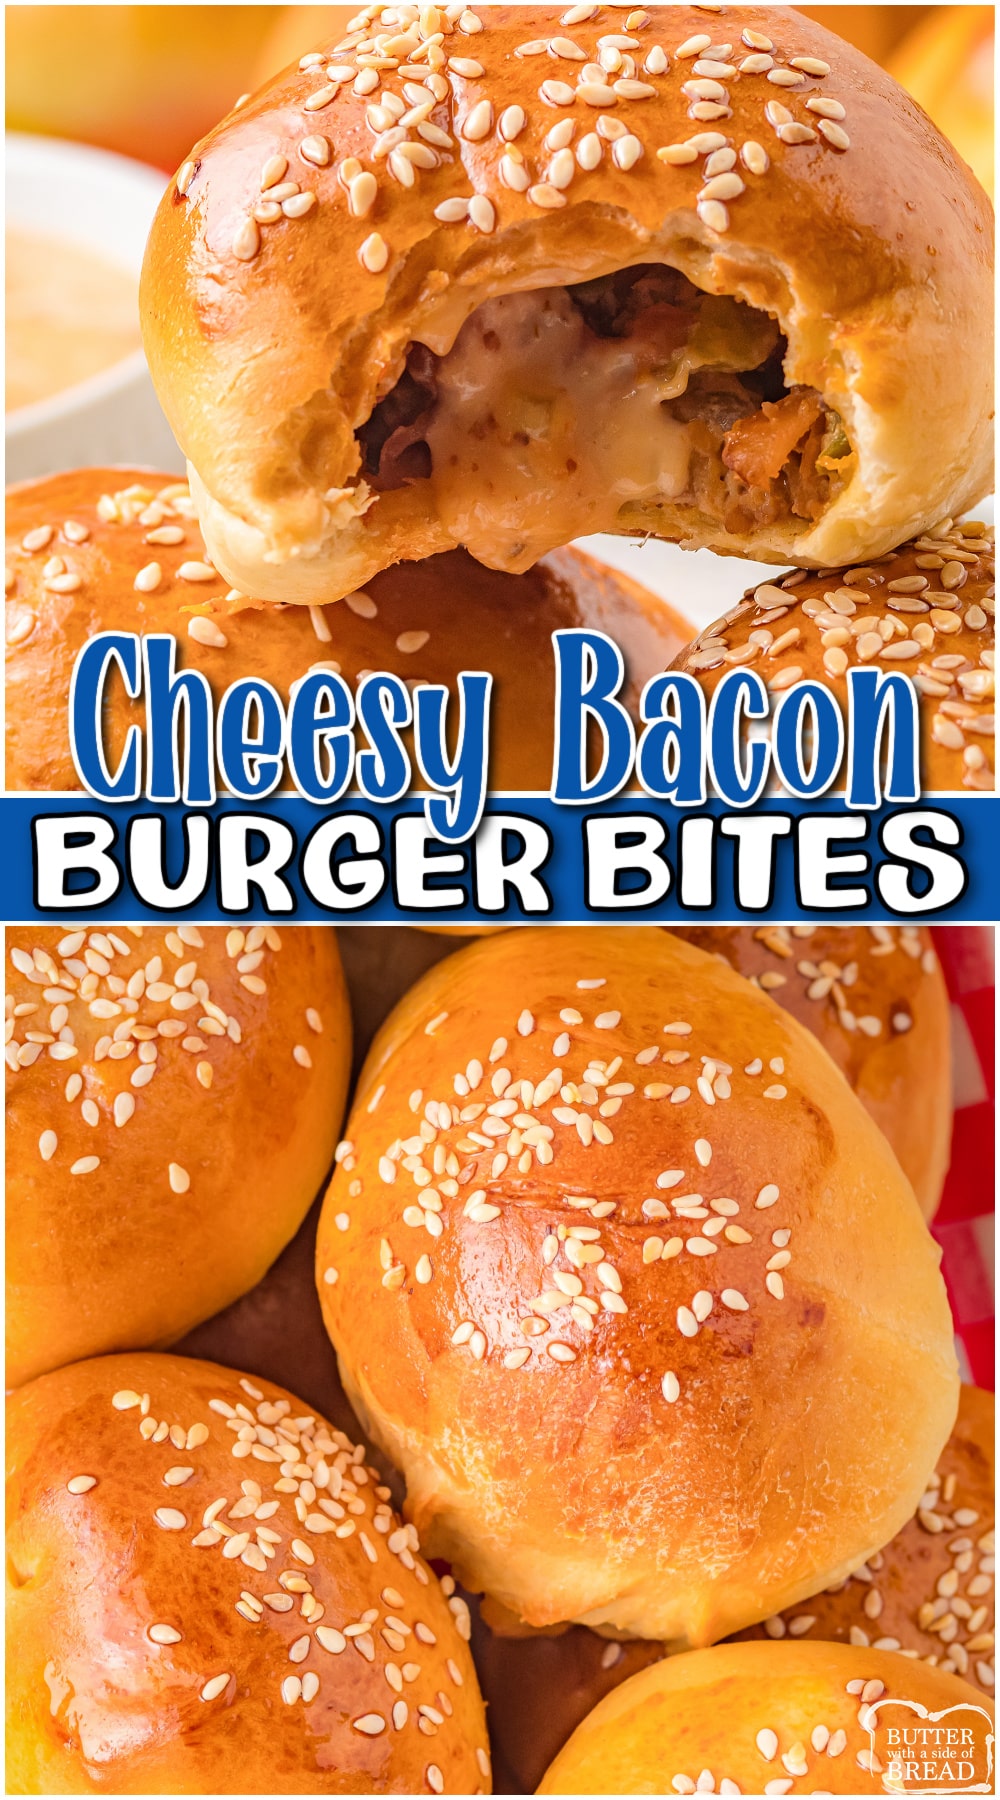 Cheeseburger Rolls are the perfect New Years appetizer! This stuffed cheeseburger recipe is served with a Big Mac dipping sauce that adds a wonderful combination of flavors.